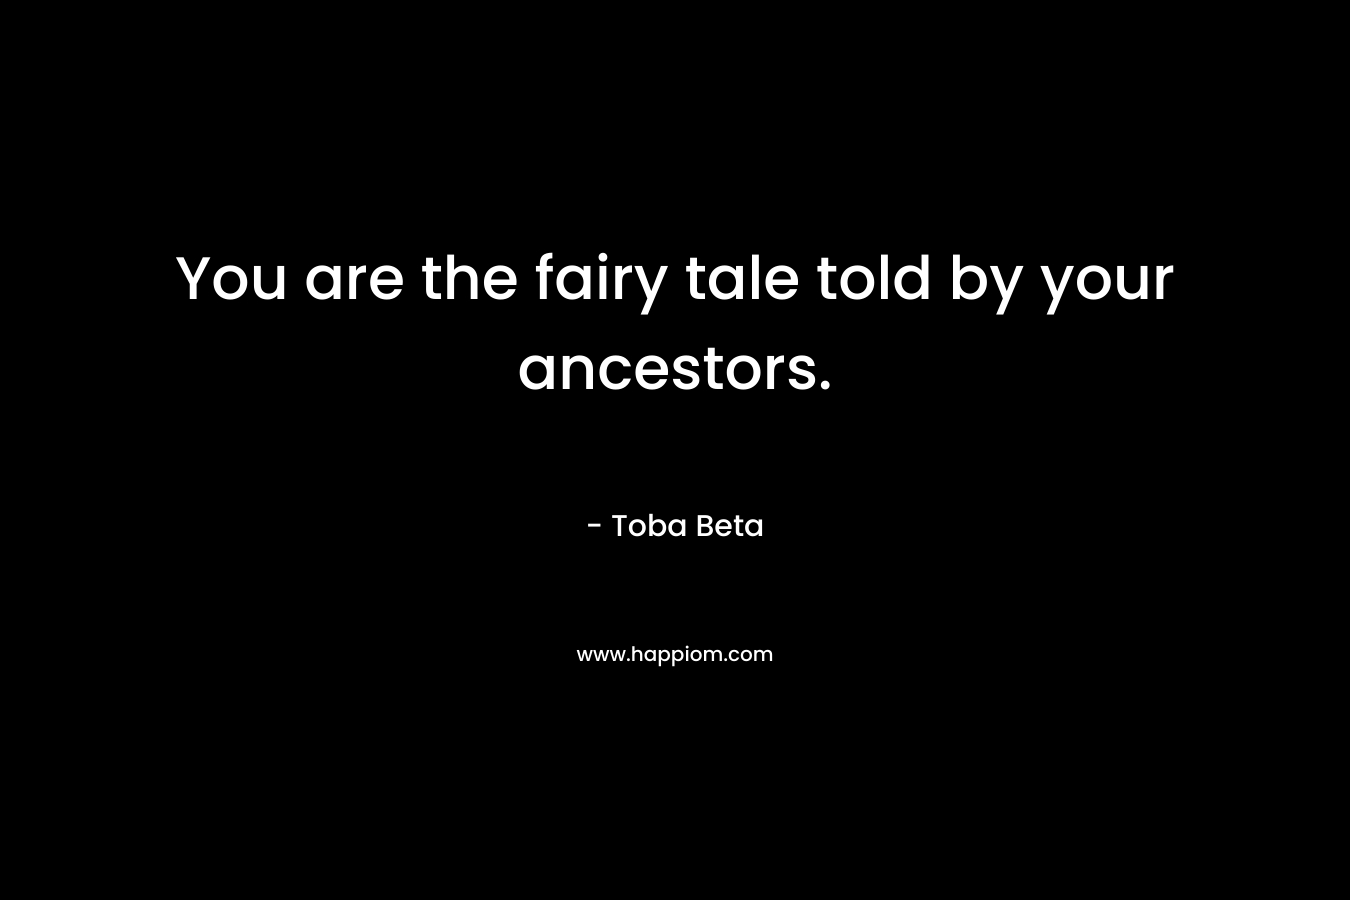 You are the fairy tale told by your ancestors.